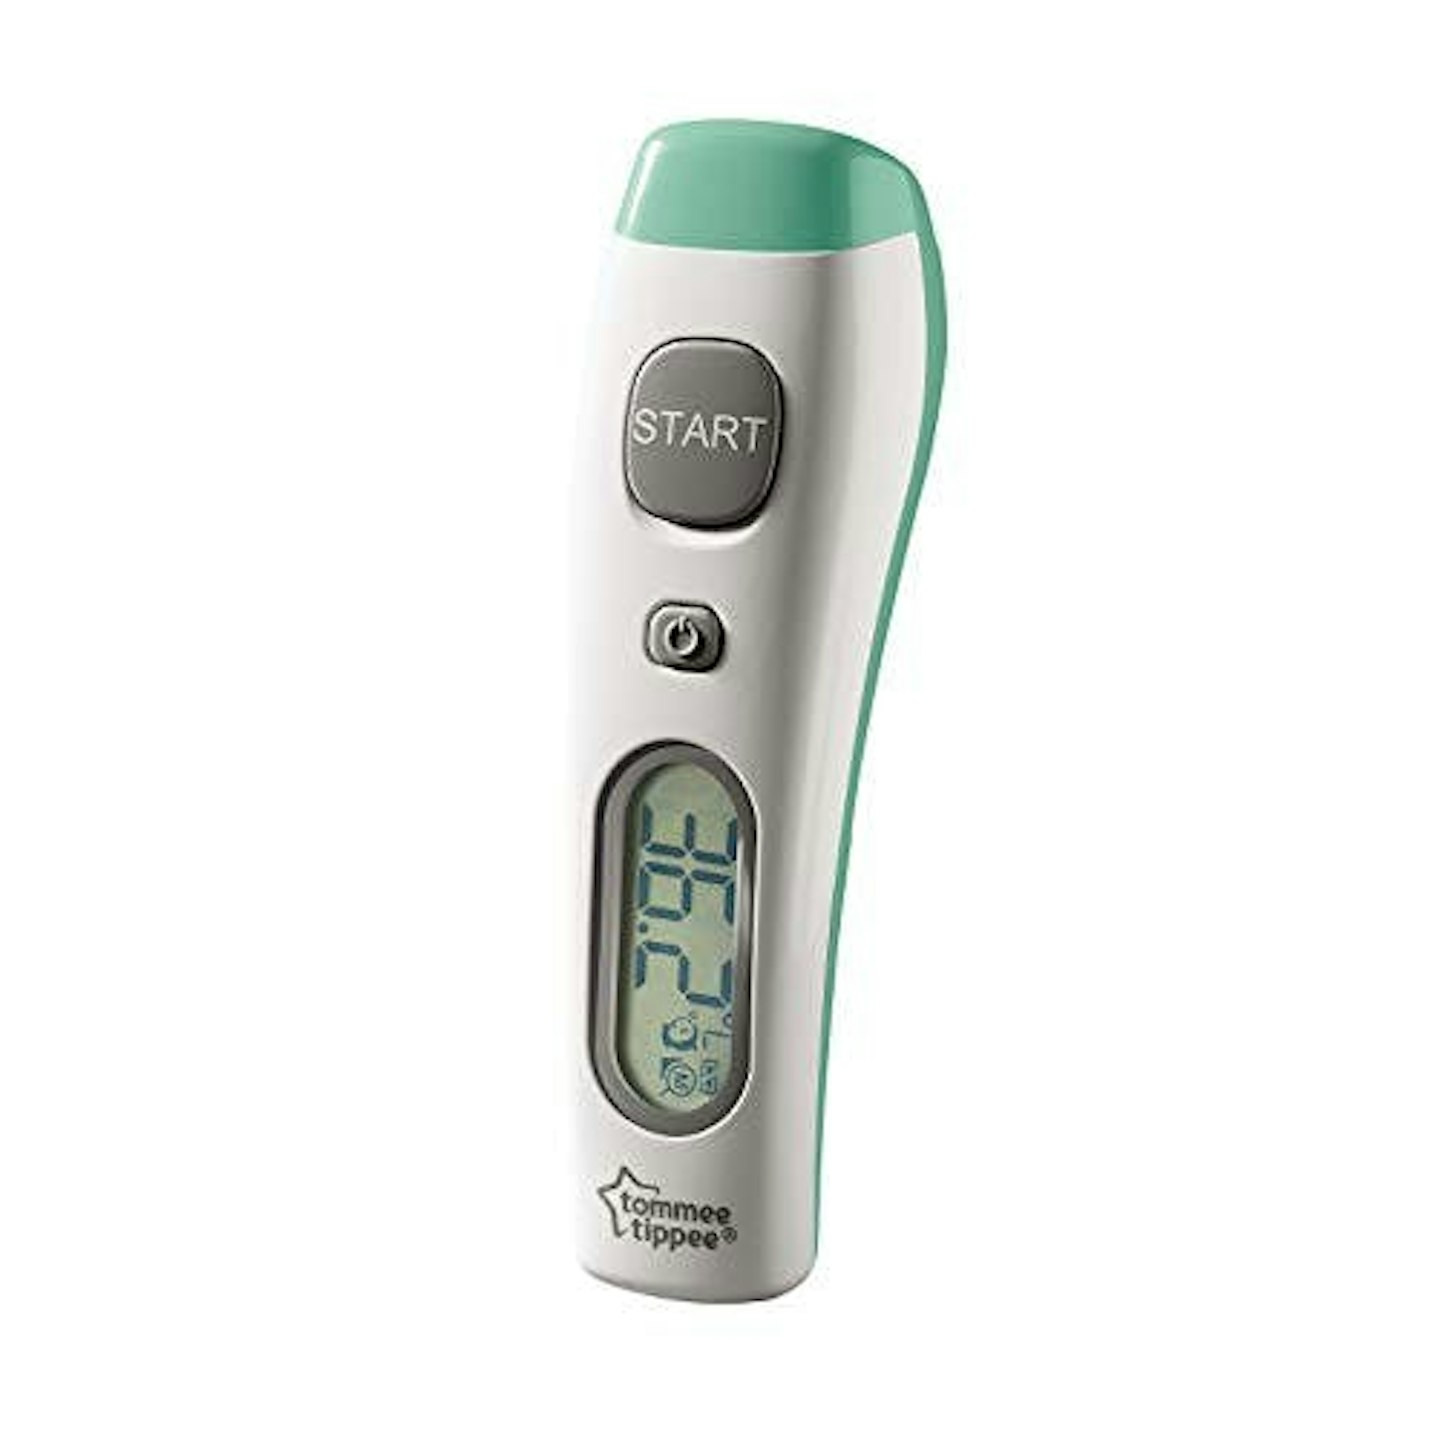 Best Baby Thermometers for Your Medicine Cabinet